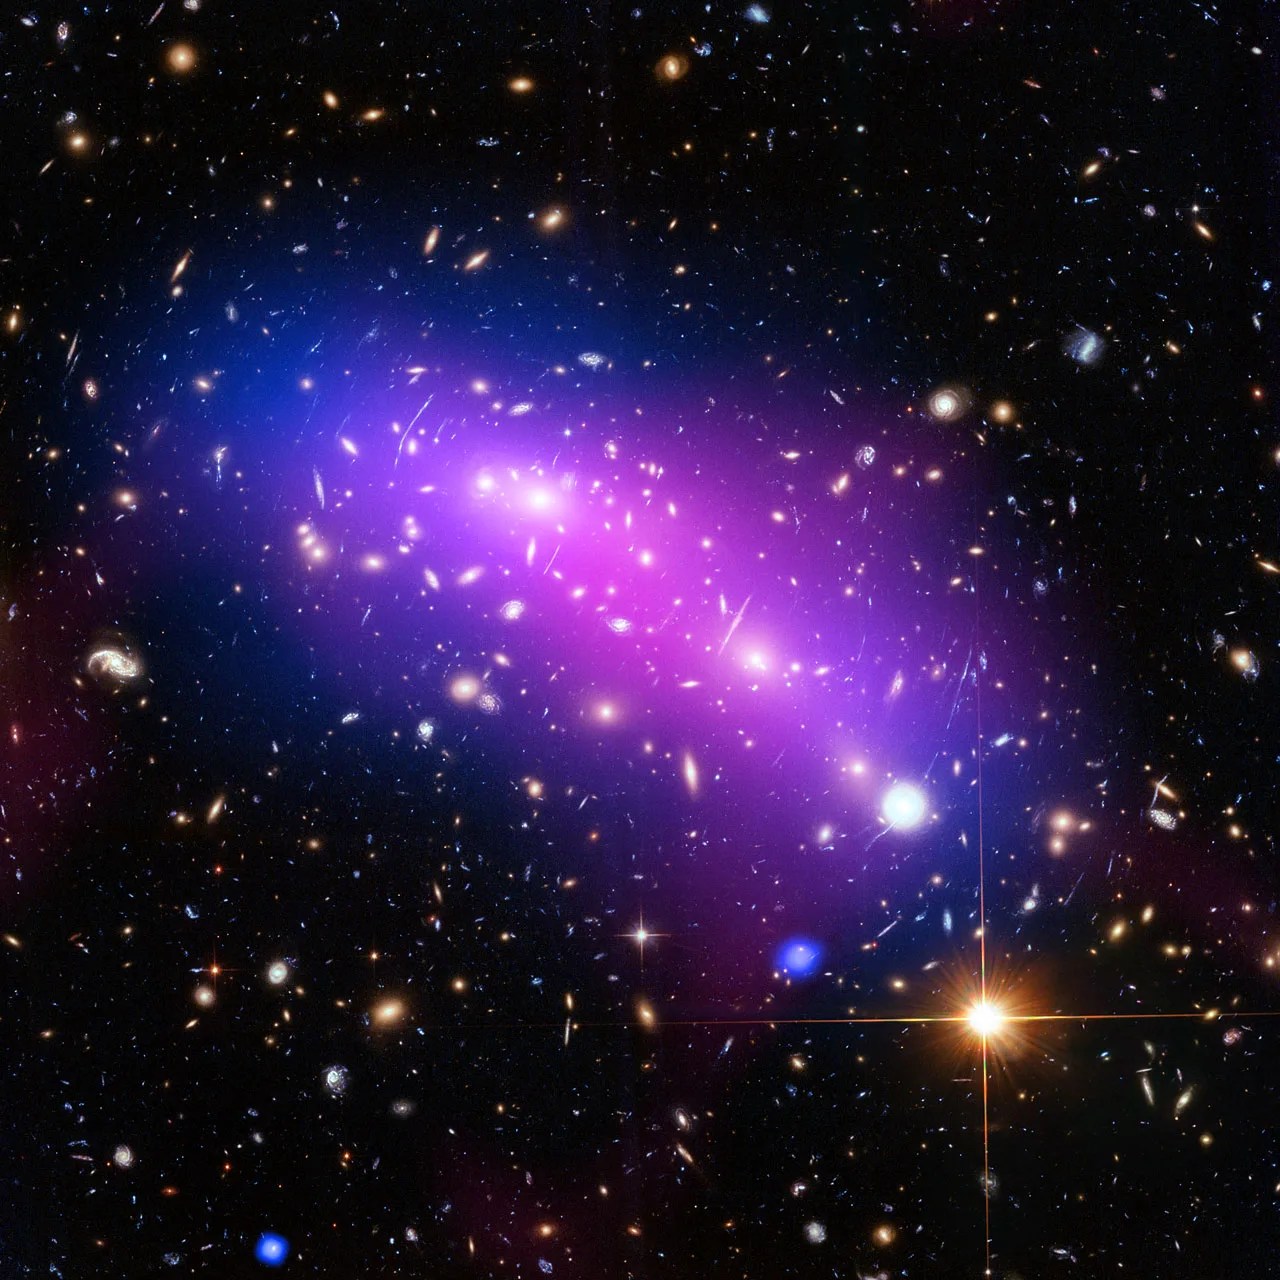 Pink, purple and blue colliding galaxy clusters